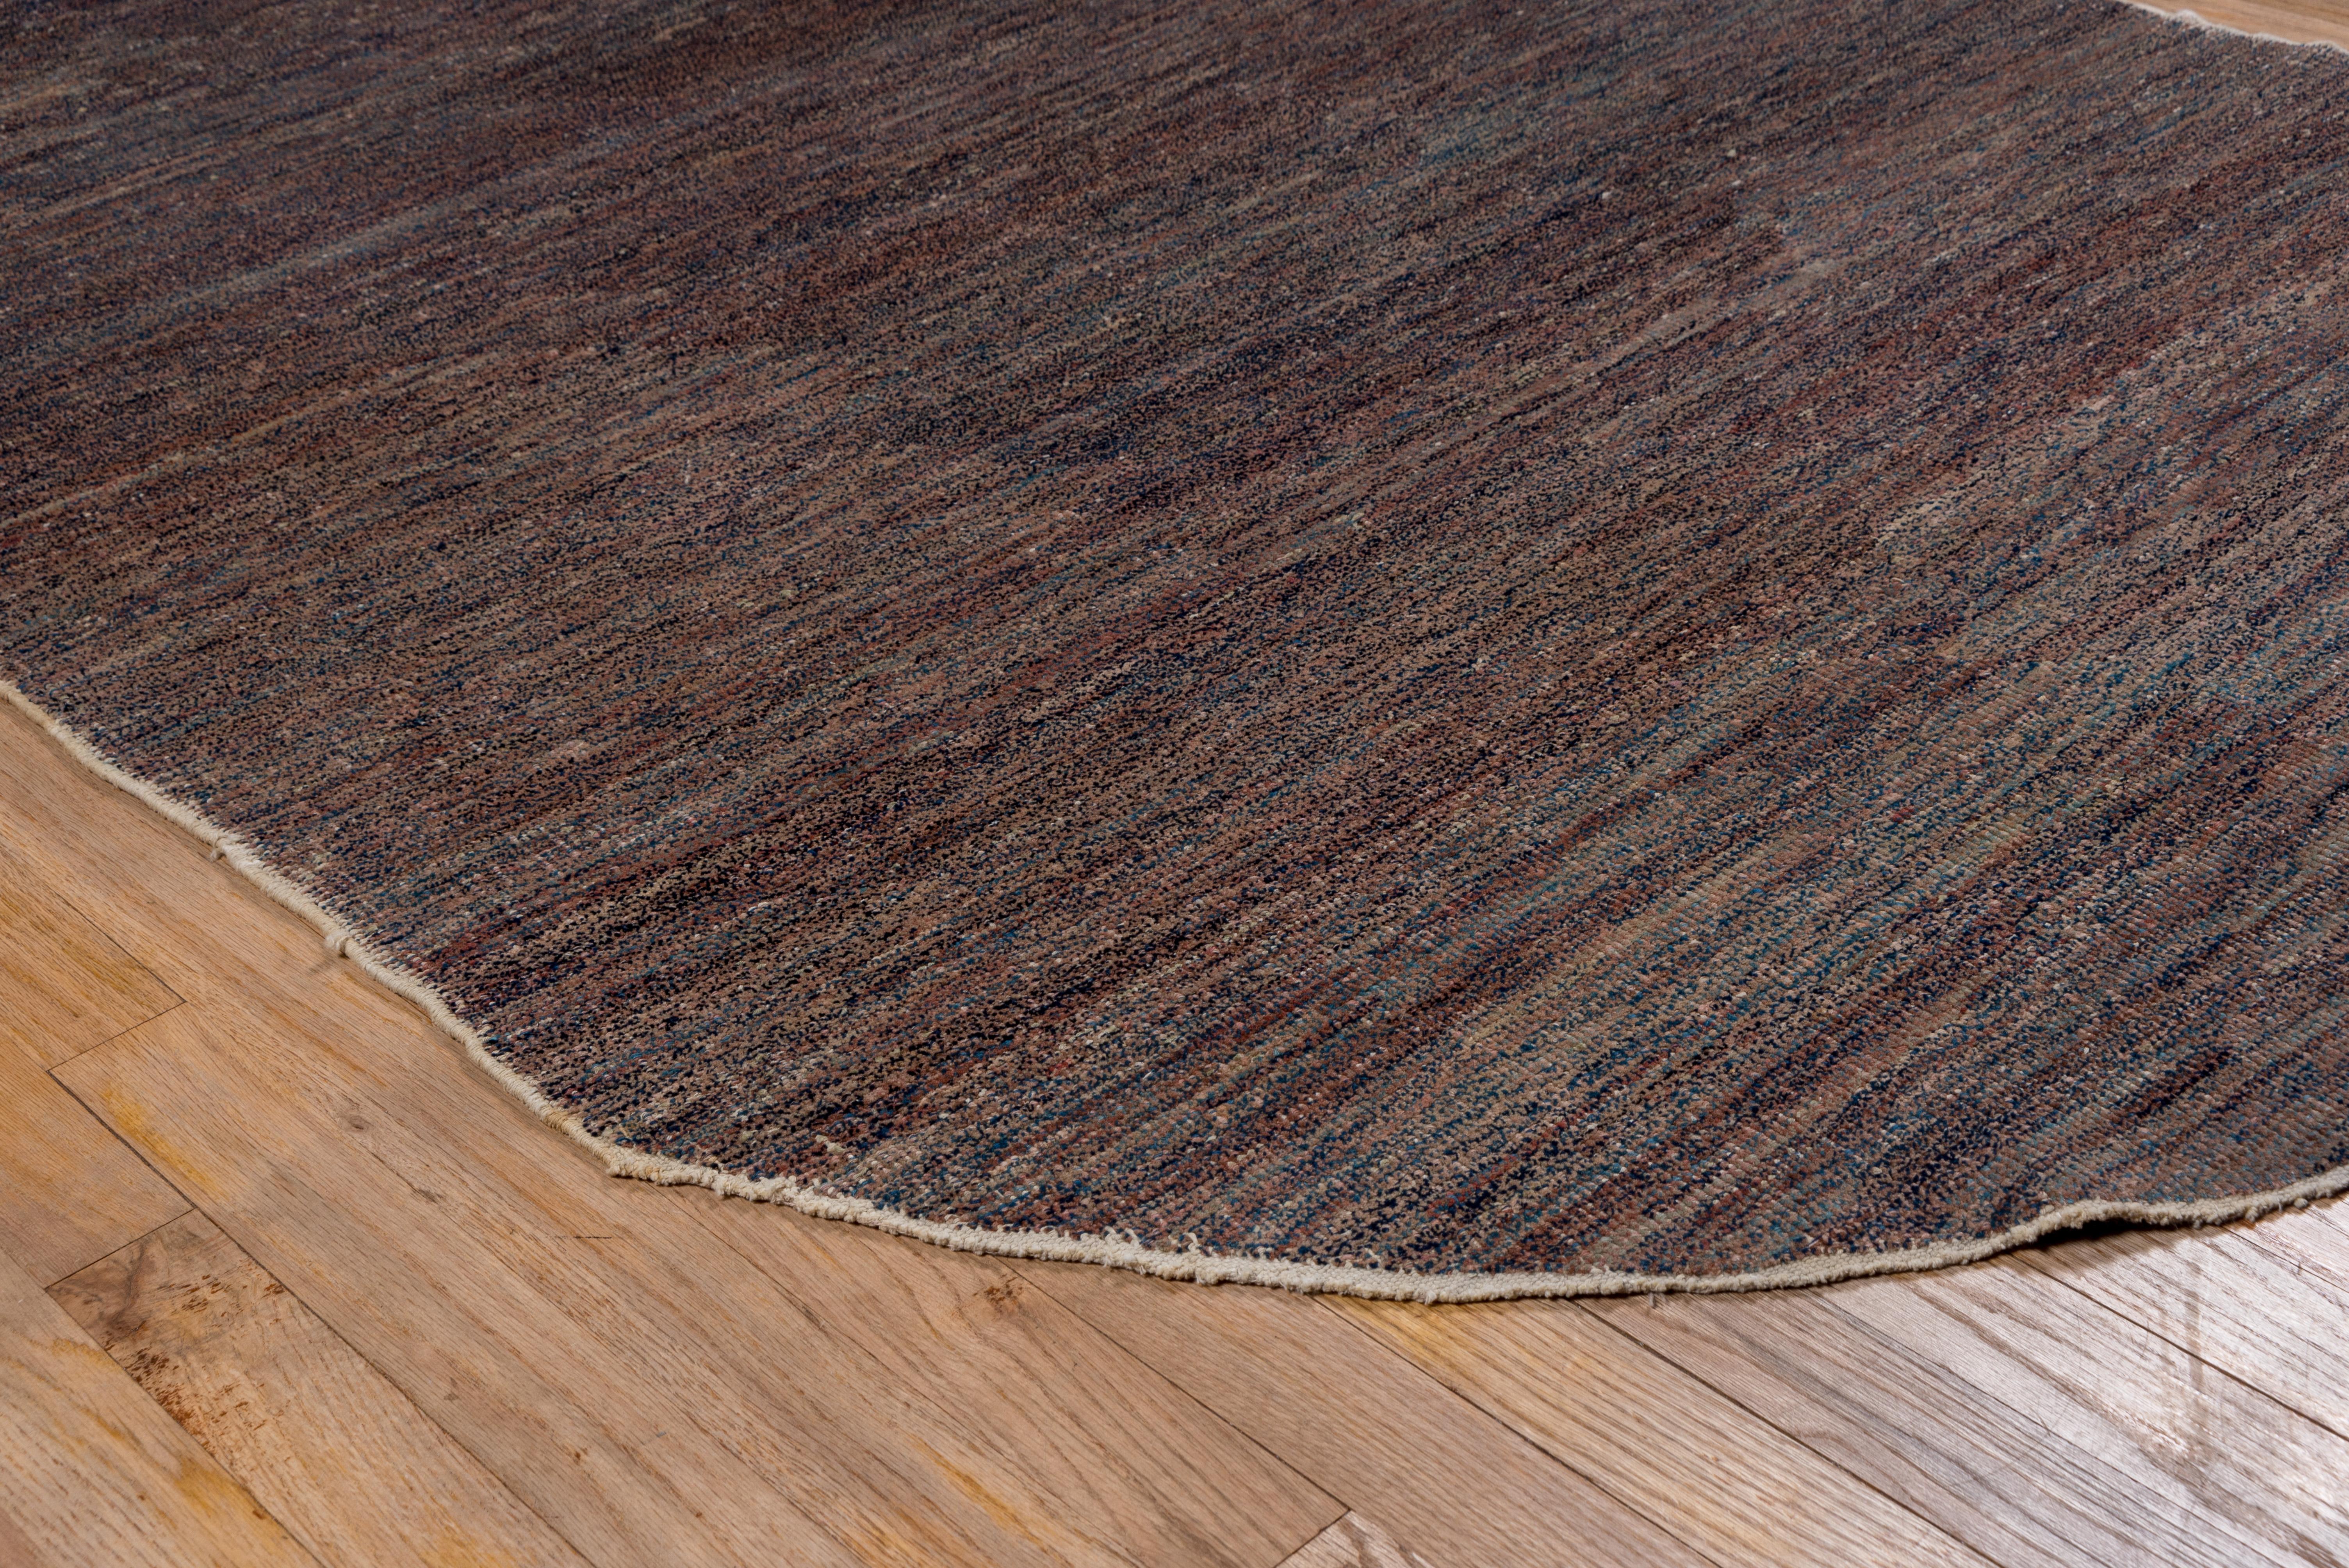 This essentially monochrome, borderless, undecorated elliptical rug has a speckled grey/black pattern constantly varying throughout. The abrash/striation goes end to end and side to side. The condition is fairly good, with a short, brushy pile.
 